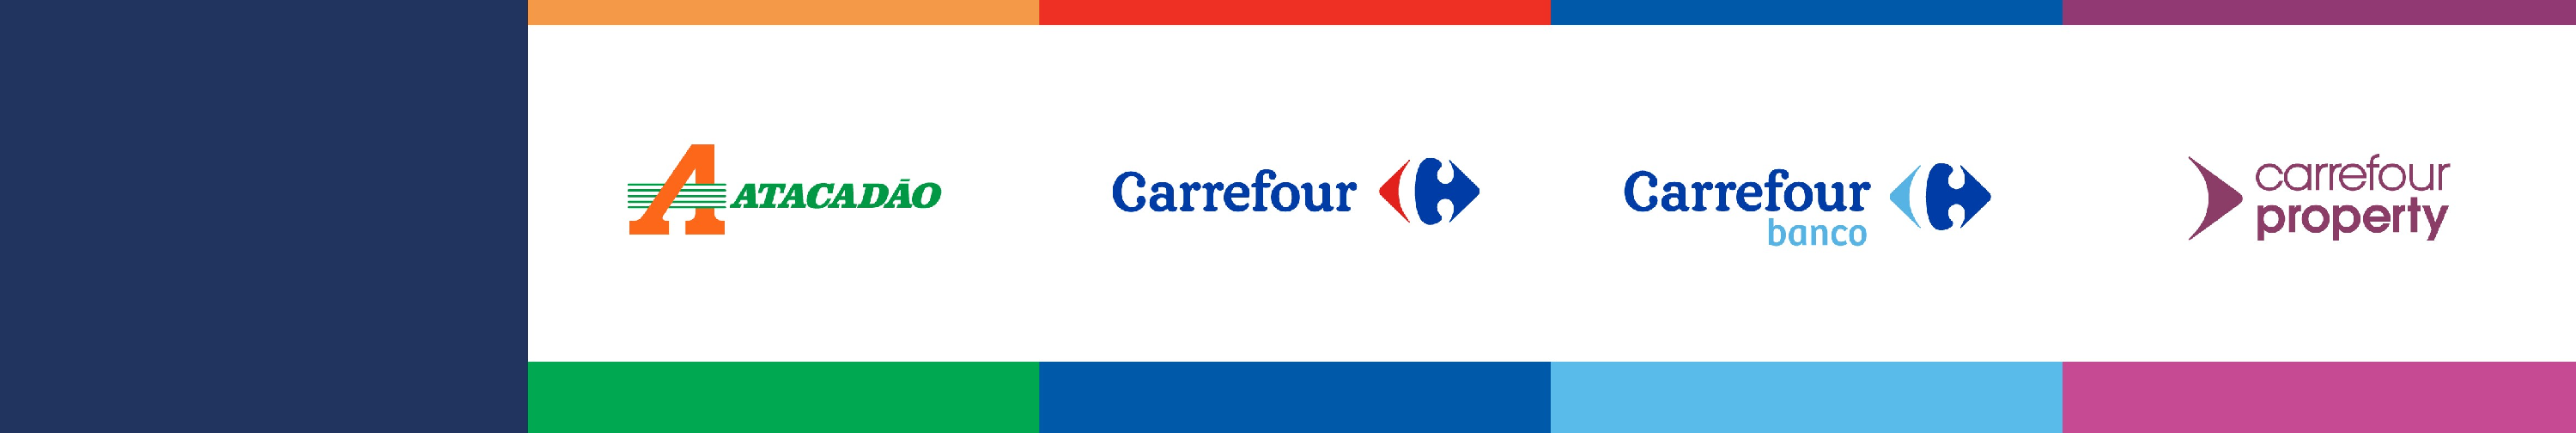 carrefour background